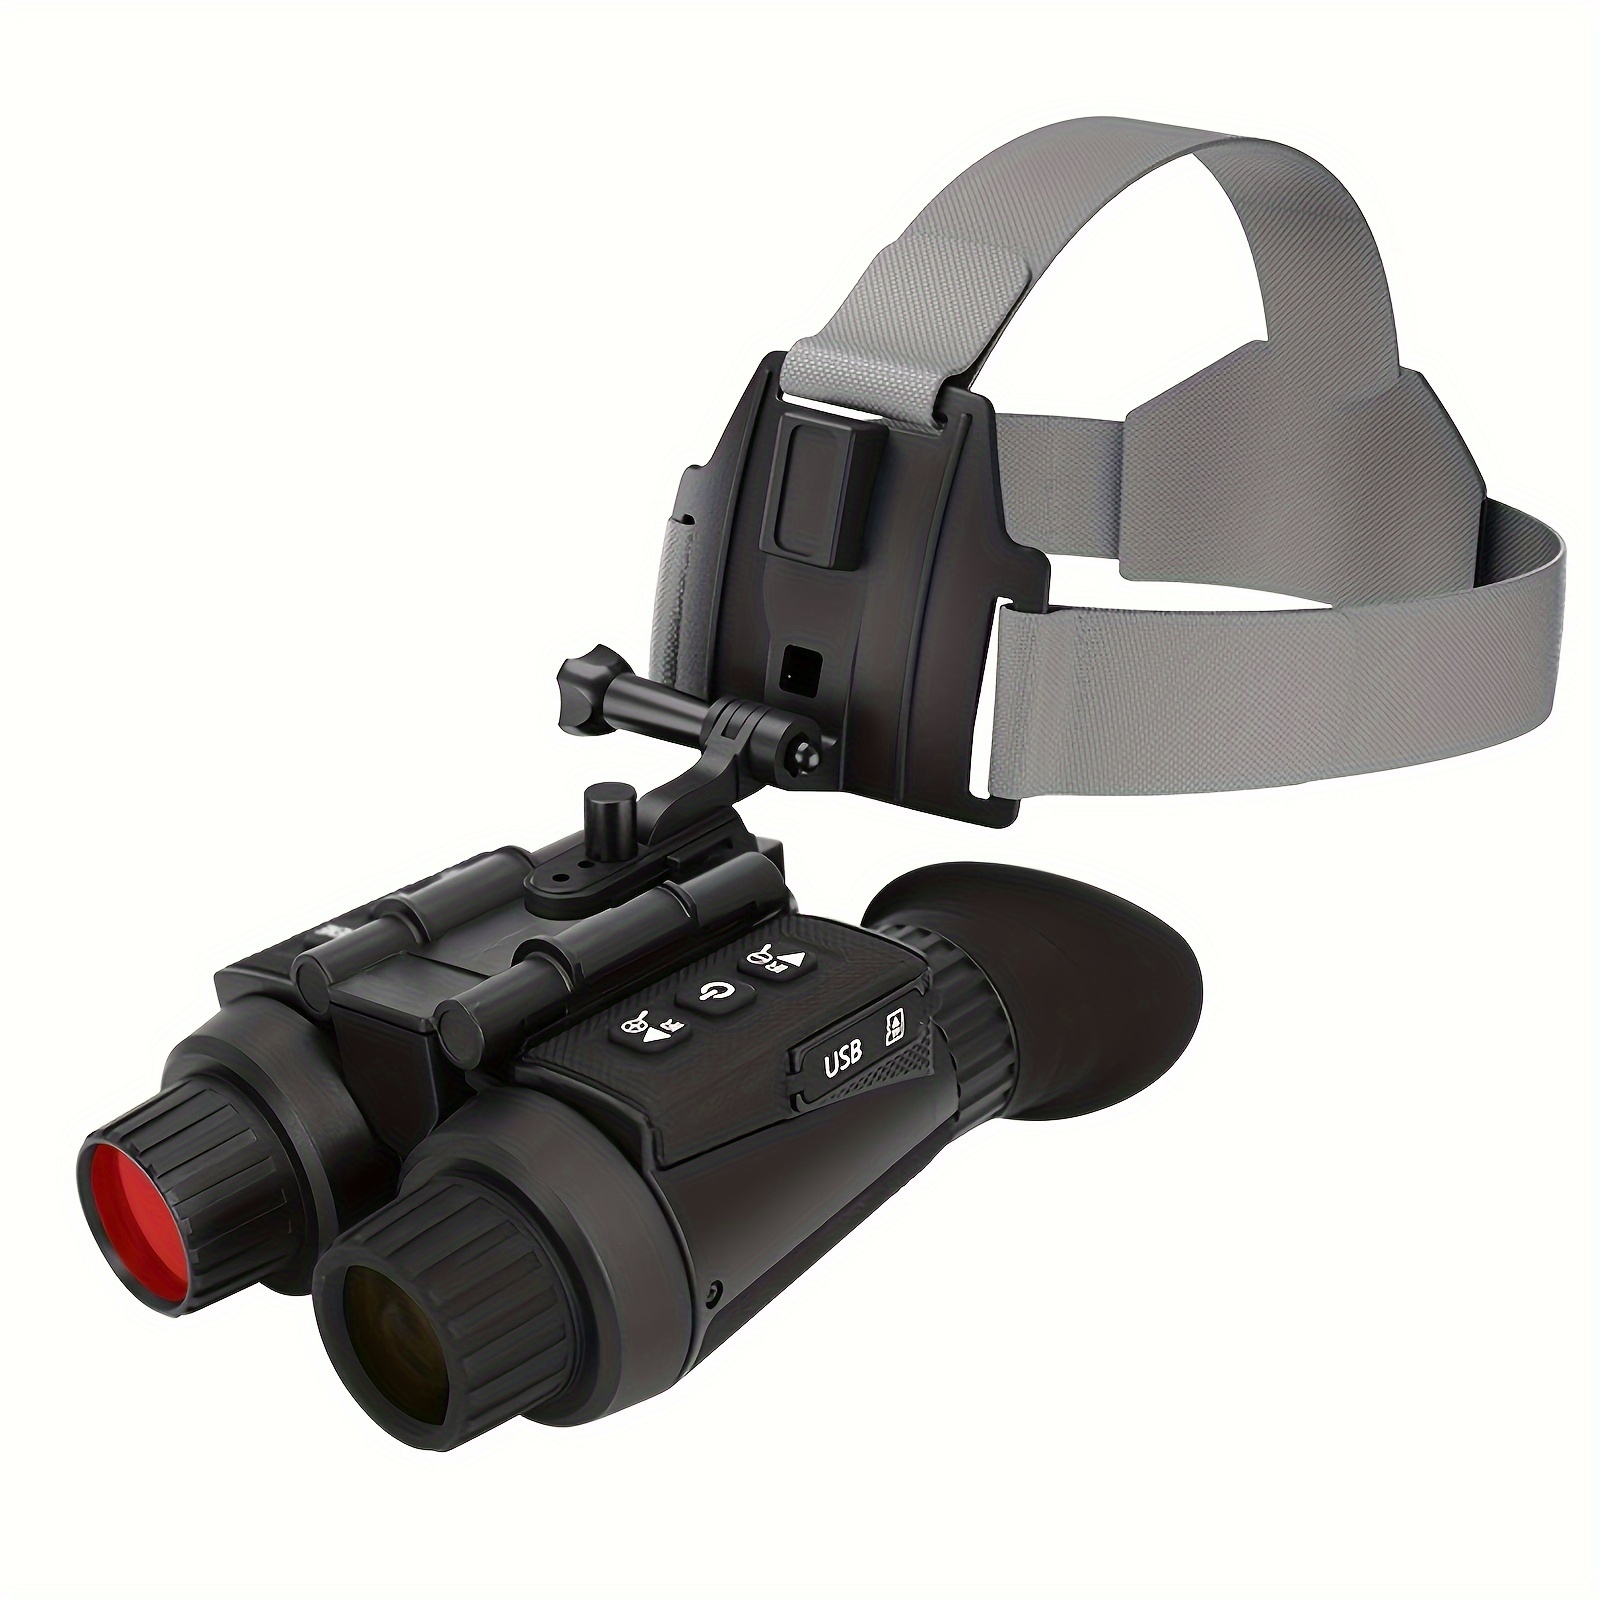 

Binoculars The First Binoculars 4k Digital Infrared Night Vision Dark Observation Photography And Video Suitable For Outdoor Surveillance